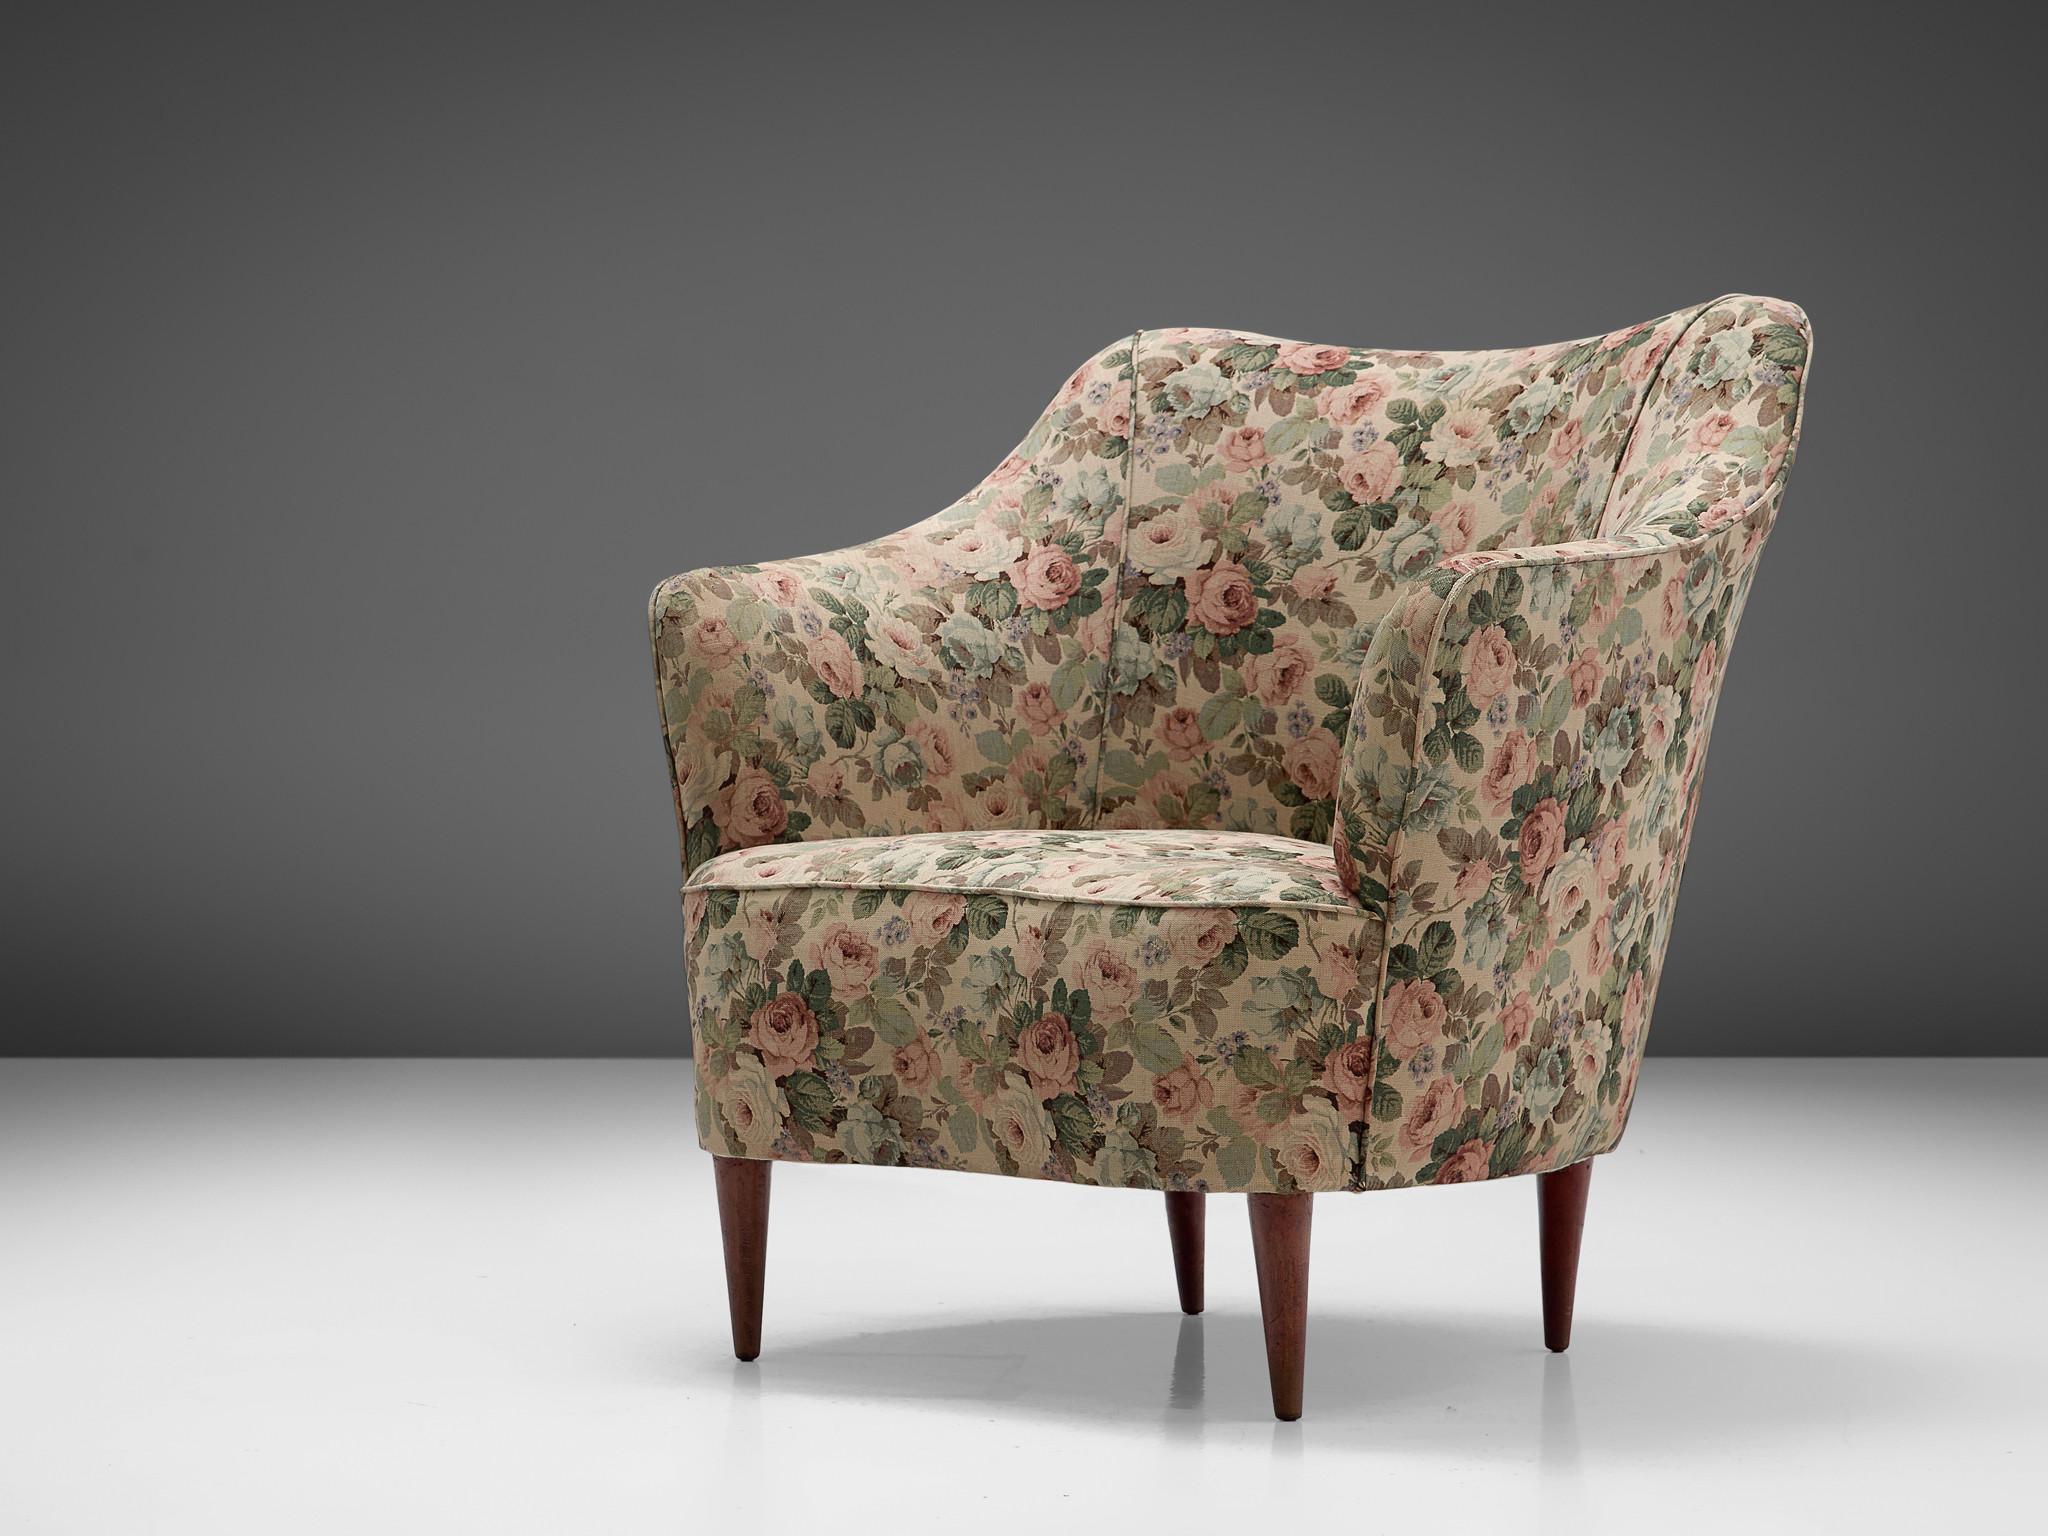 Mid-20th Century Italian Pair of Club Chairs in Floral Upholstery